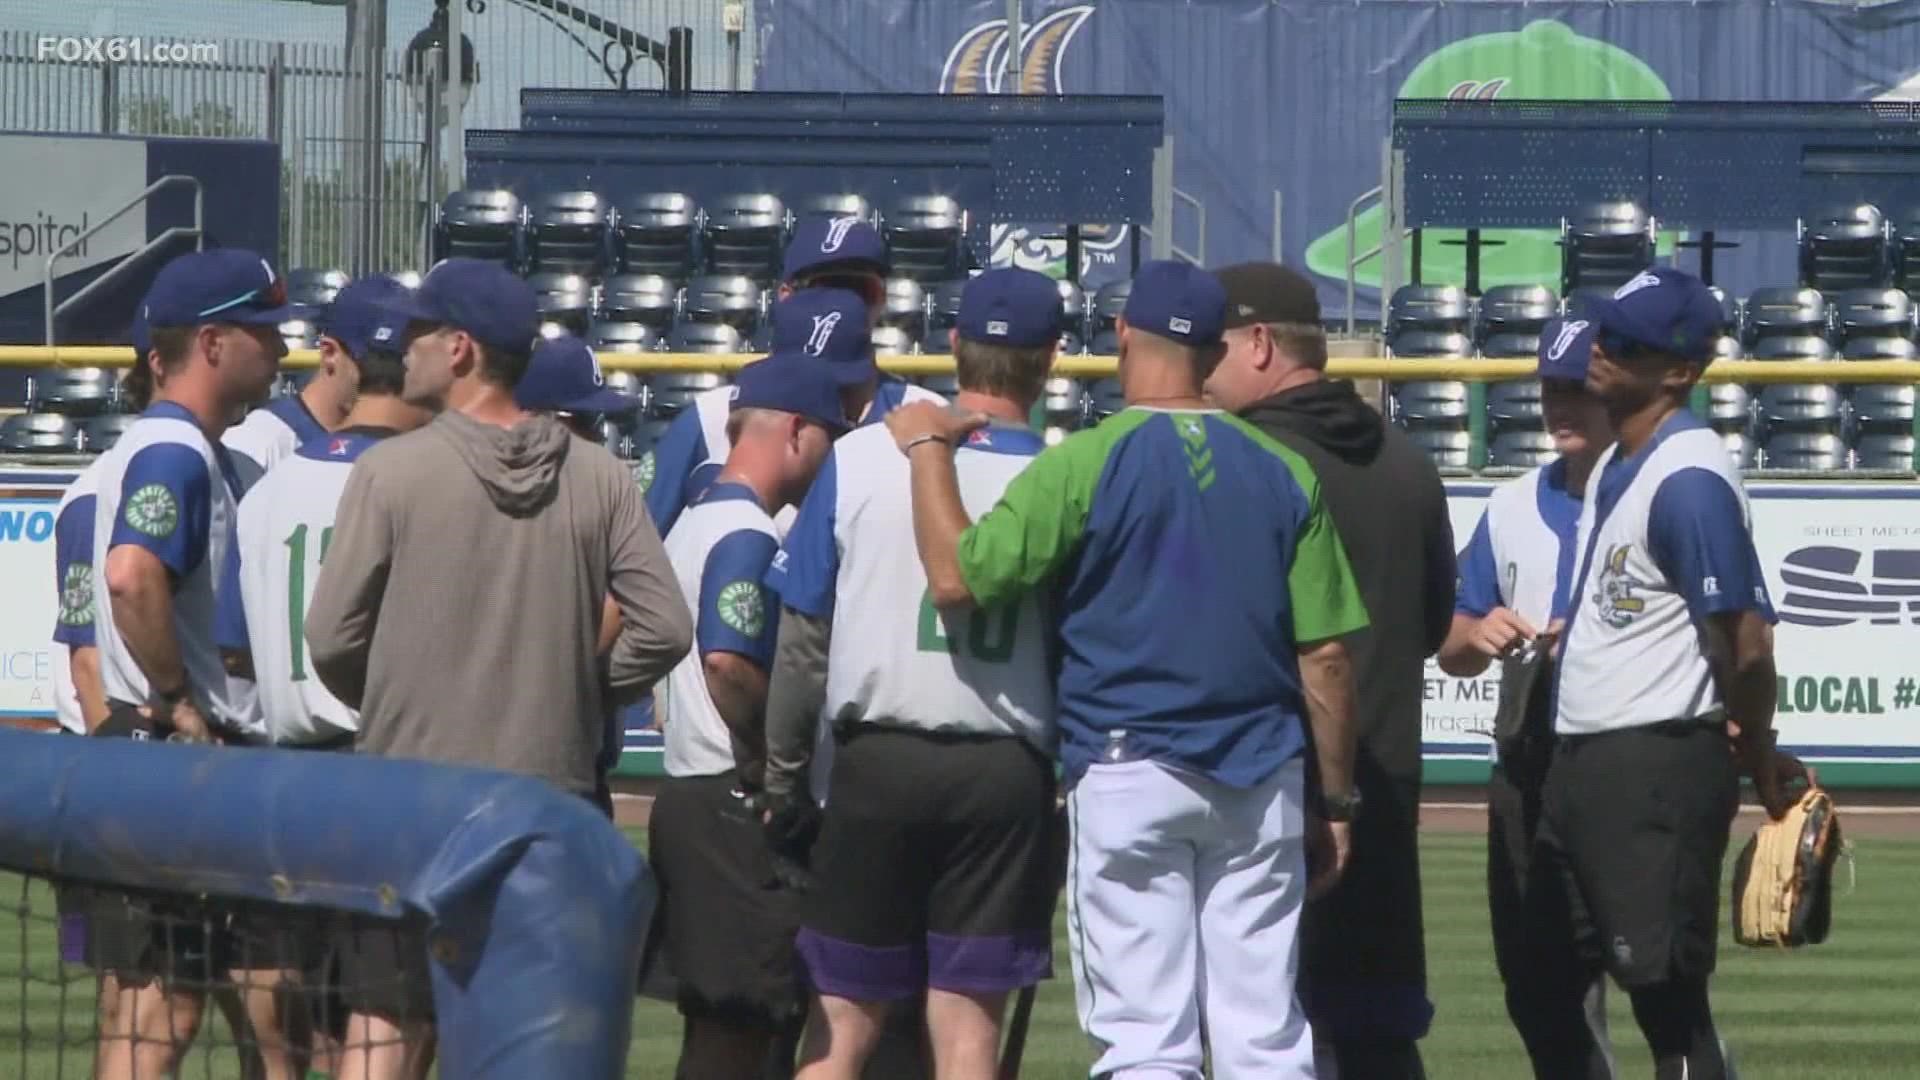 The Yard Goats had their most wins in franchise history last season.